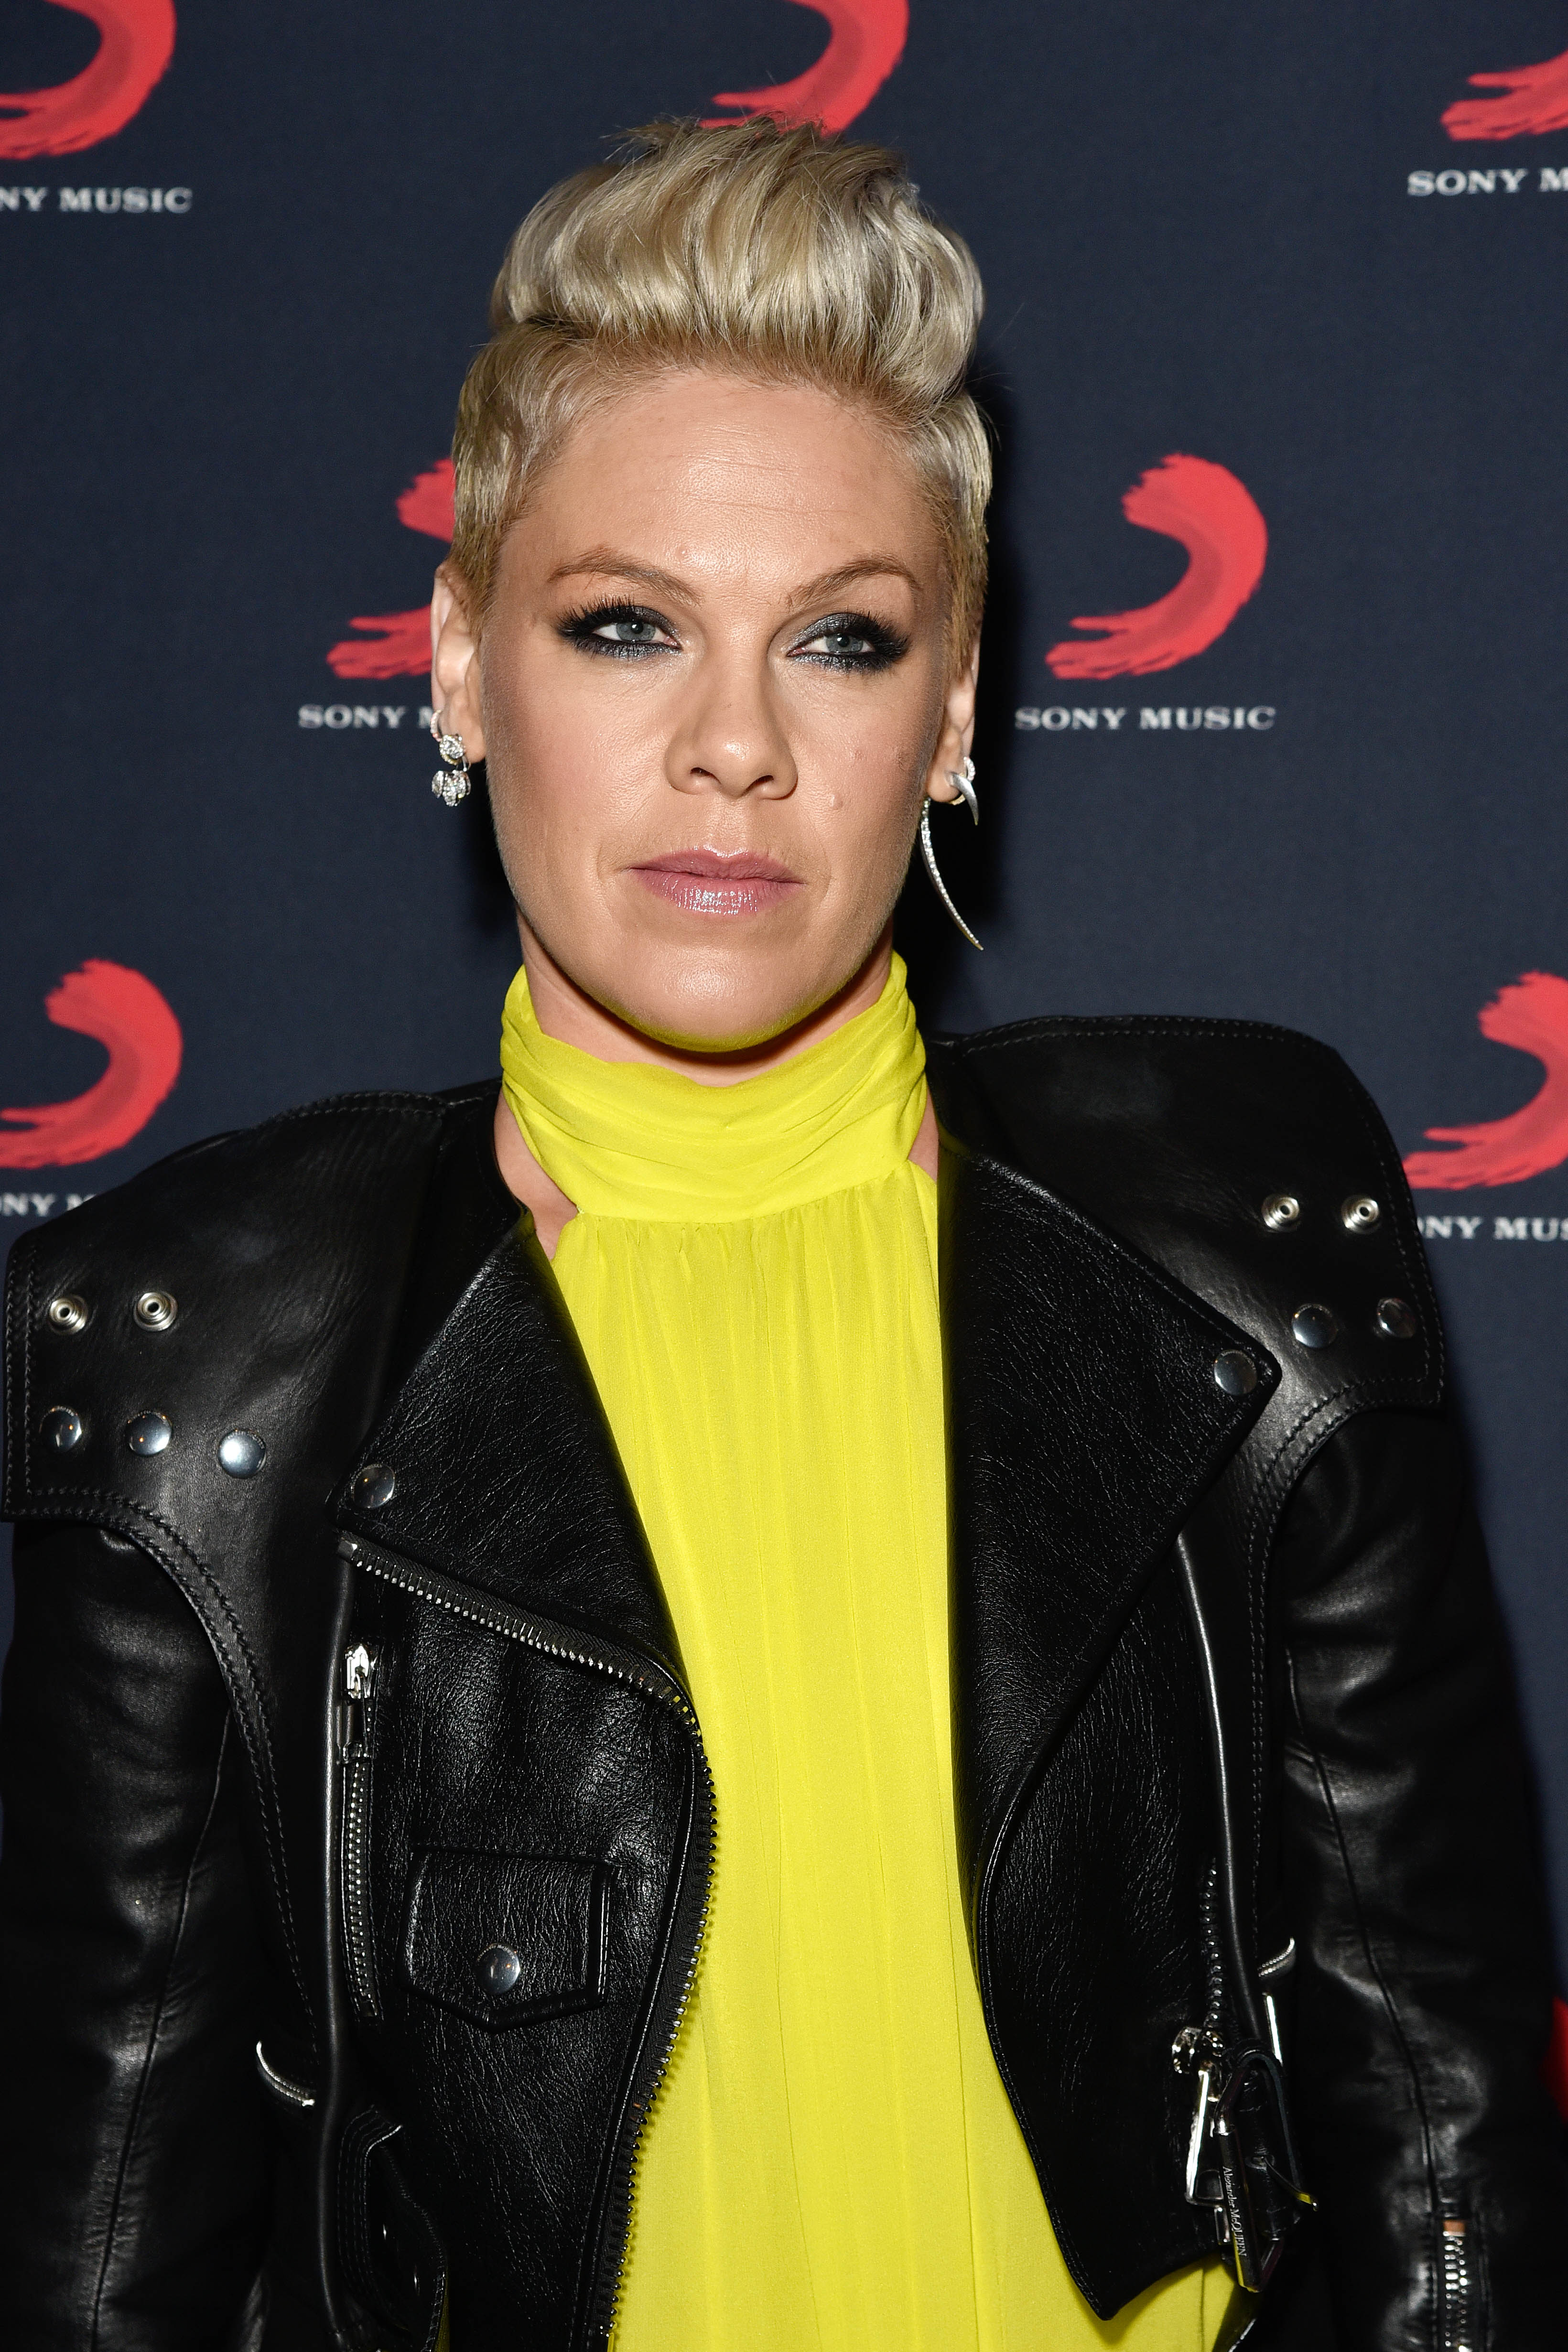 Pop star Pink arriving at The BRIT Awards 2019 Sony after party held at Aqua Shard in London, England | Photo: HGL/Getty Images